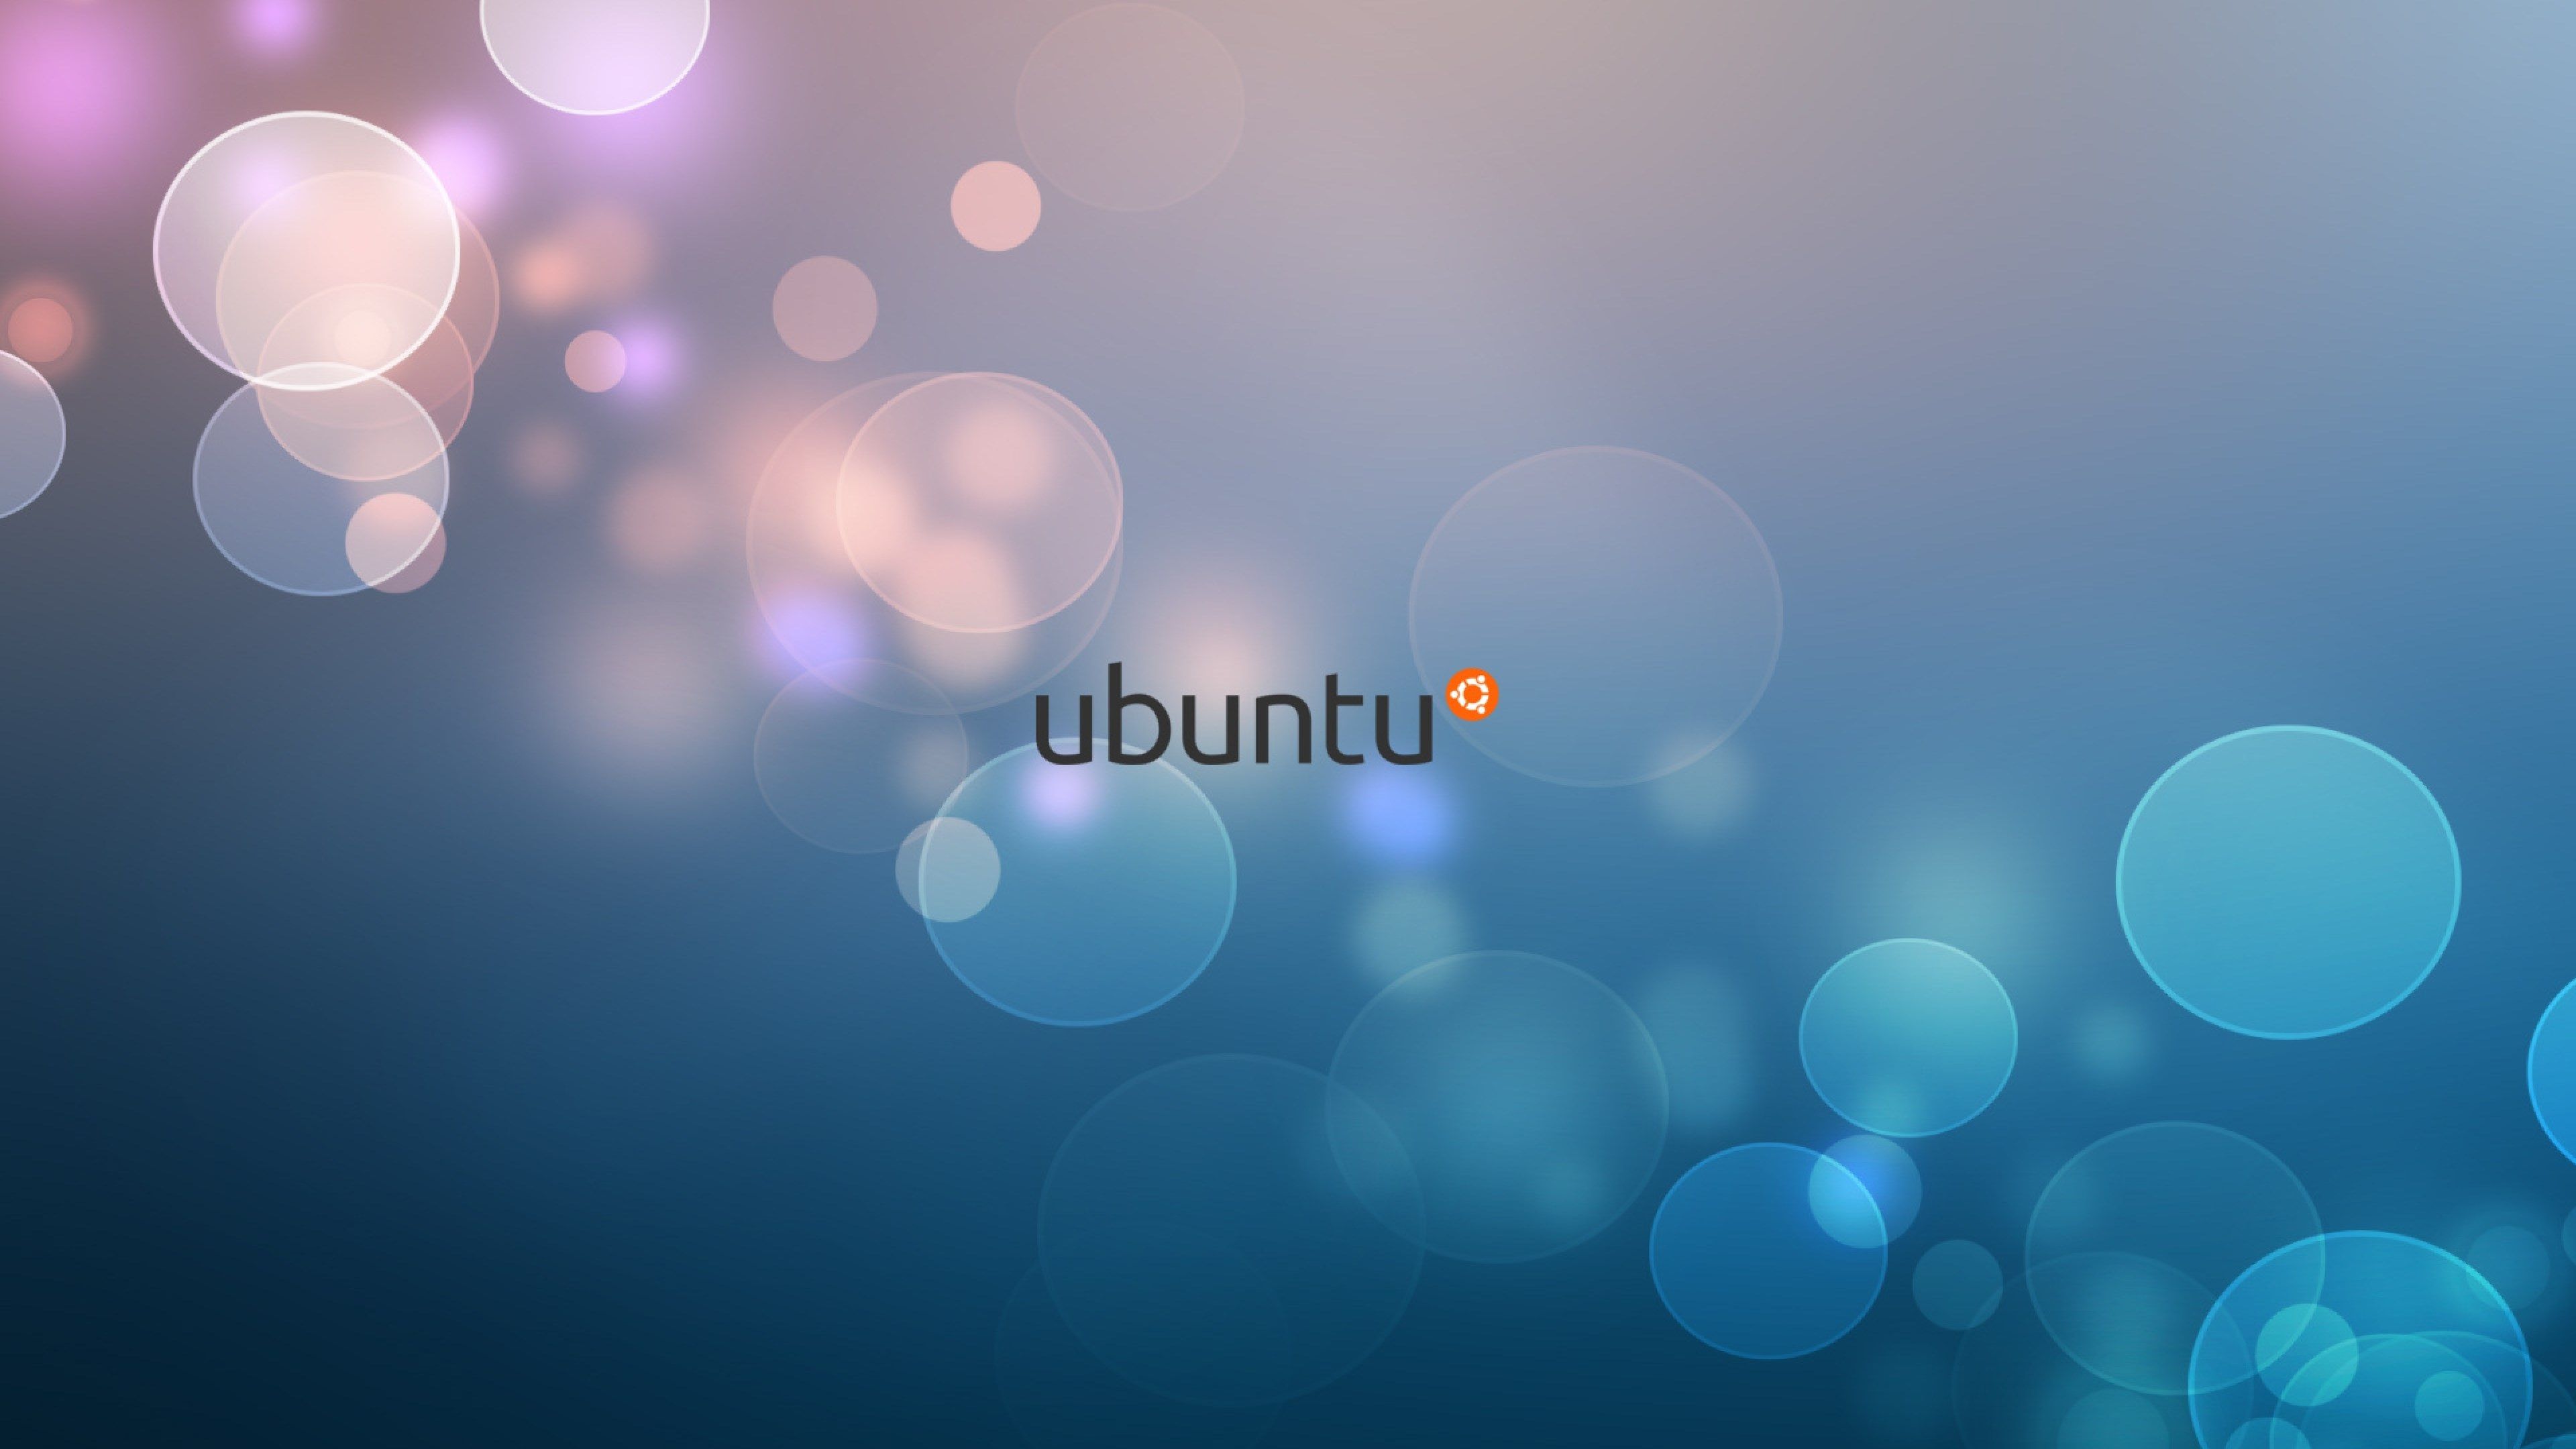 Ubuntu Wallpaper 4K / We have a massive amount of HD image that will make your computer or smartphone look